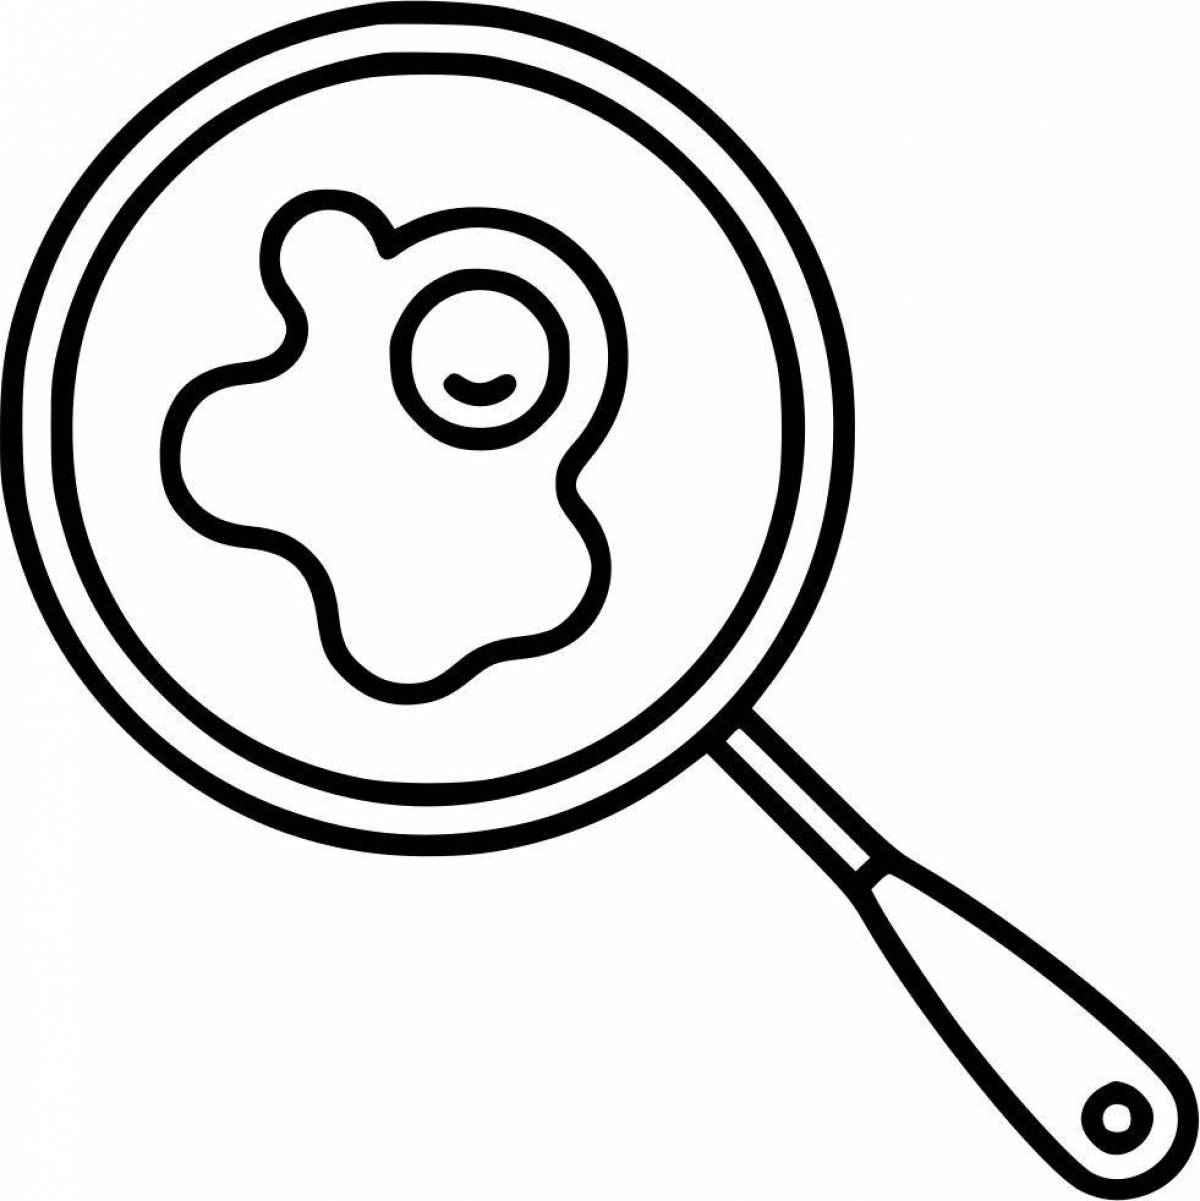 Adorable frying pan coloring page for kids